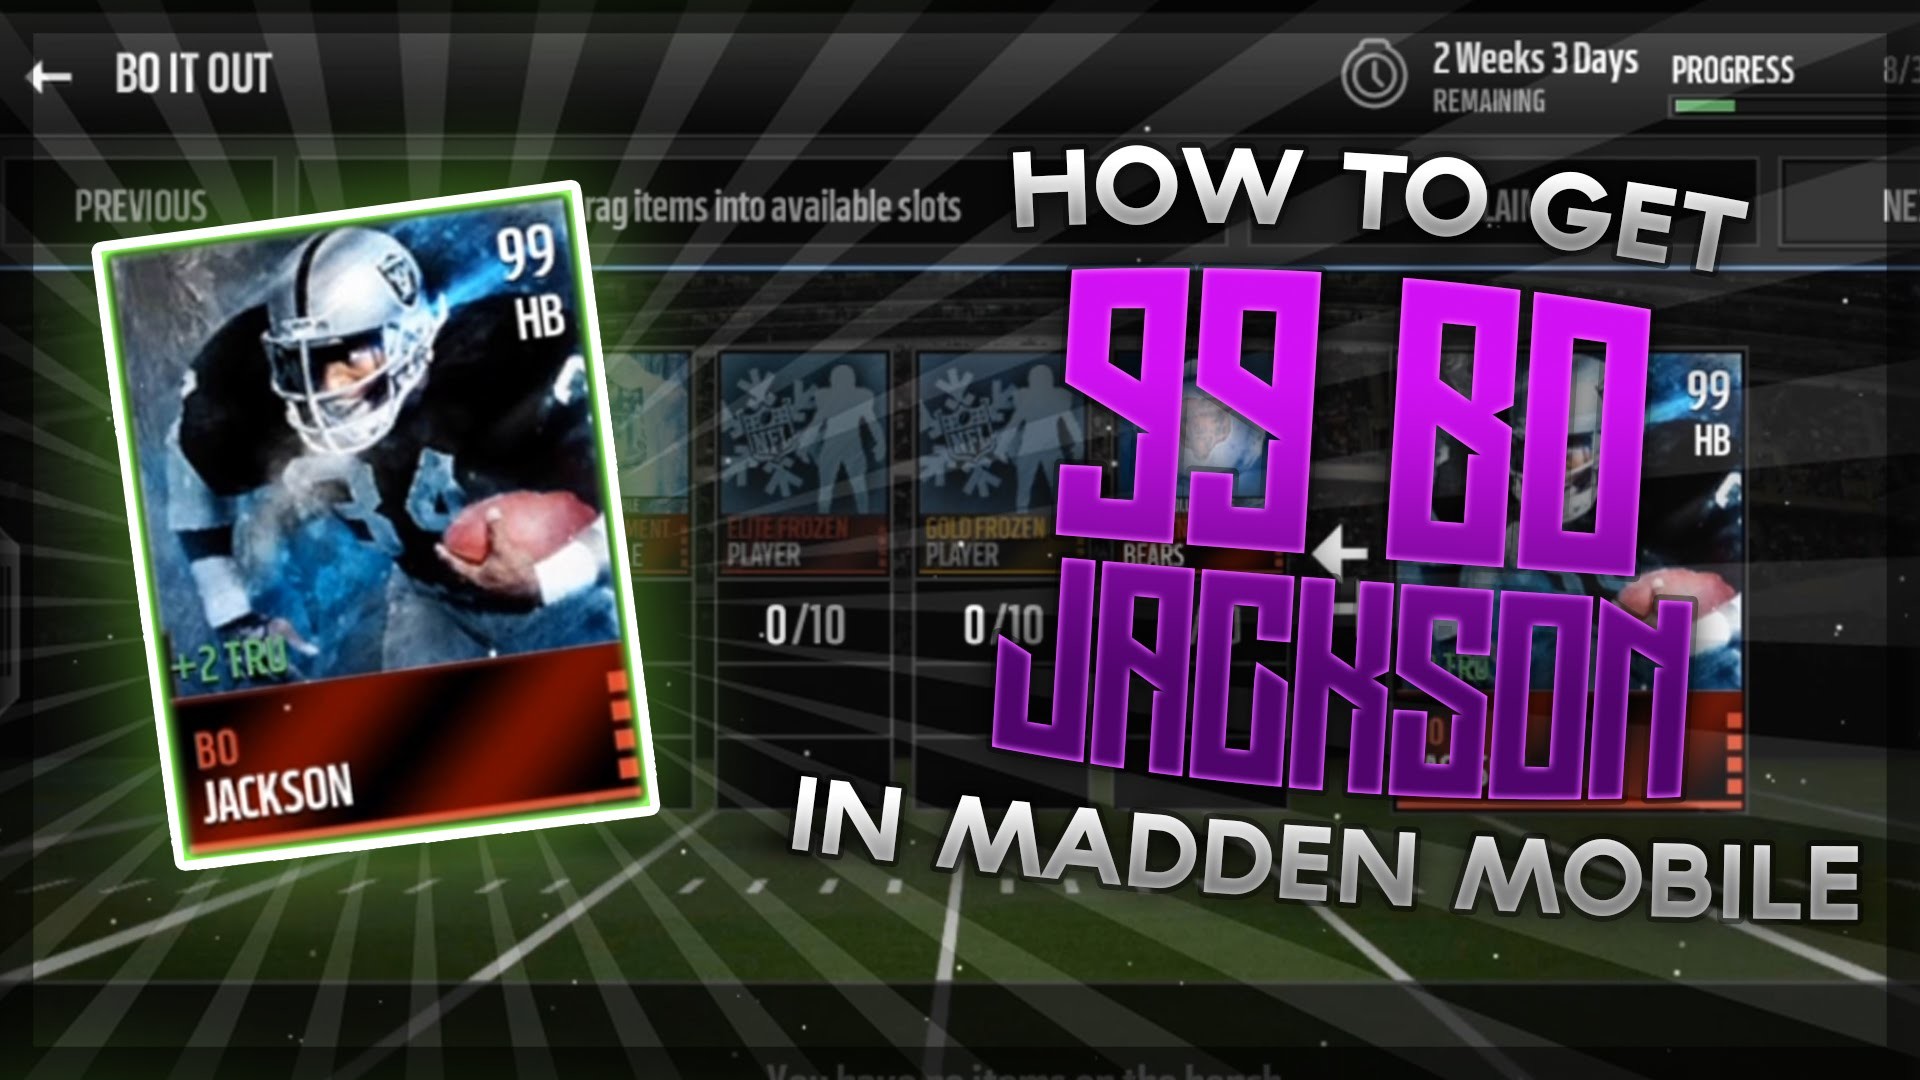 1920x1080 Madden Mobile 16 - HOW TO GET THE NEW 99 BO JACKSON | Tips & Tricks on how  to get him! - YouTube